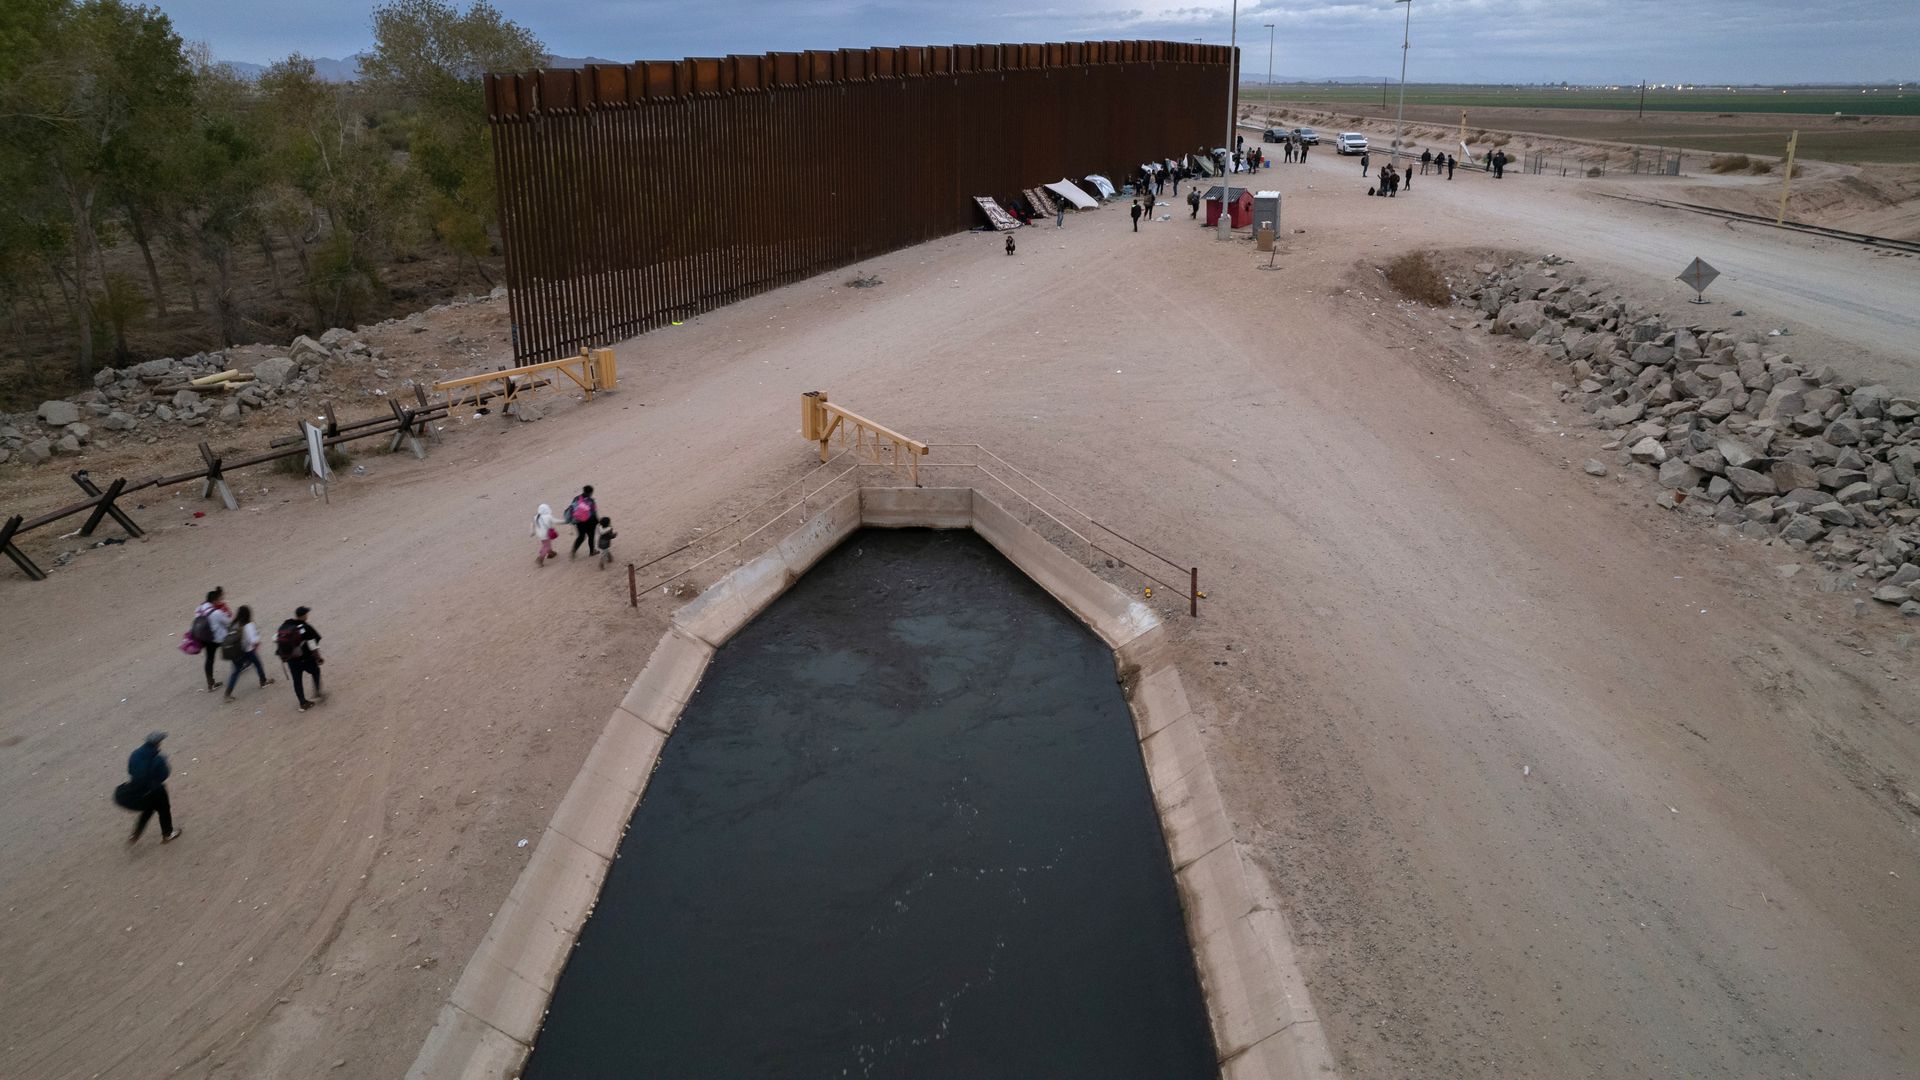 In an aerial view, Immigrants walk towards a makeshift encampment along the U.S. border wall after crossing from Mexico through a gap in the structure on December 10, 2021 in Yuma, Arizona